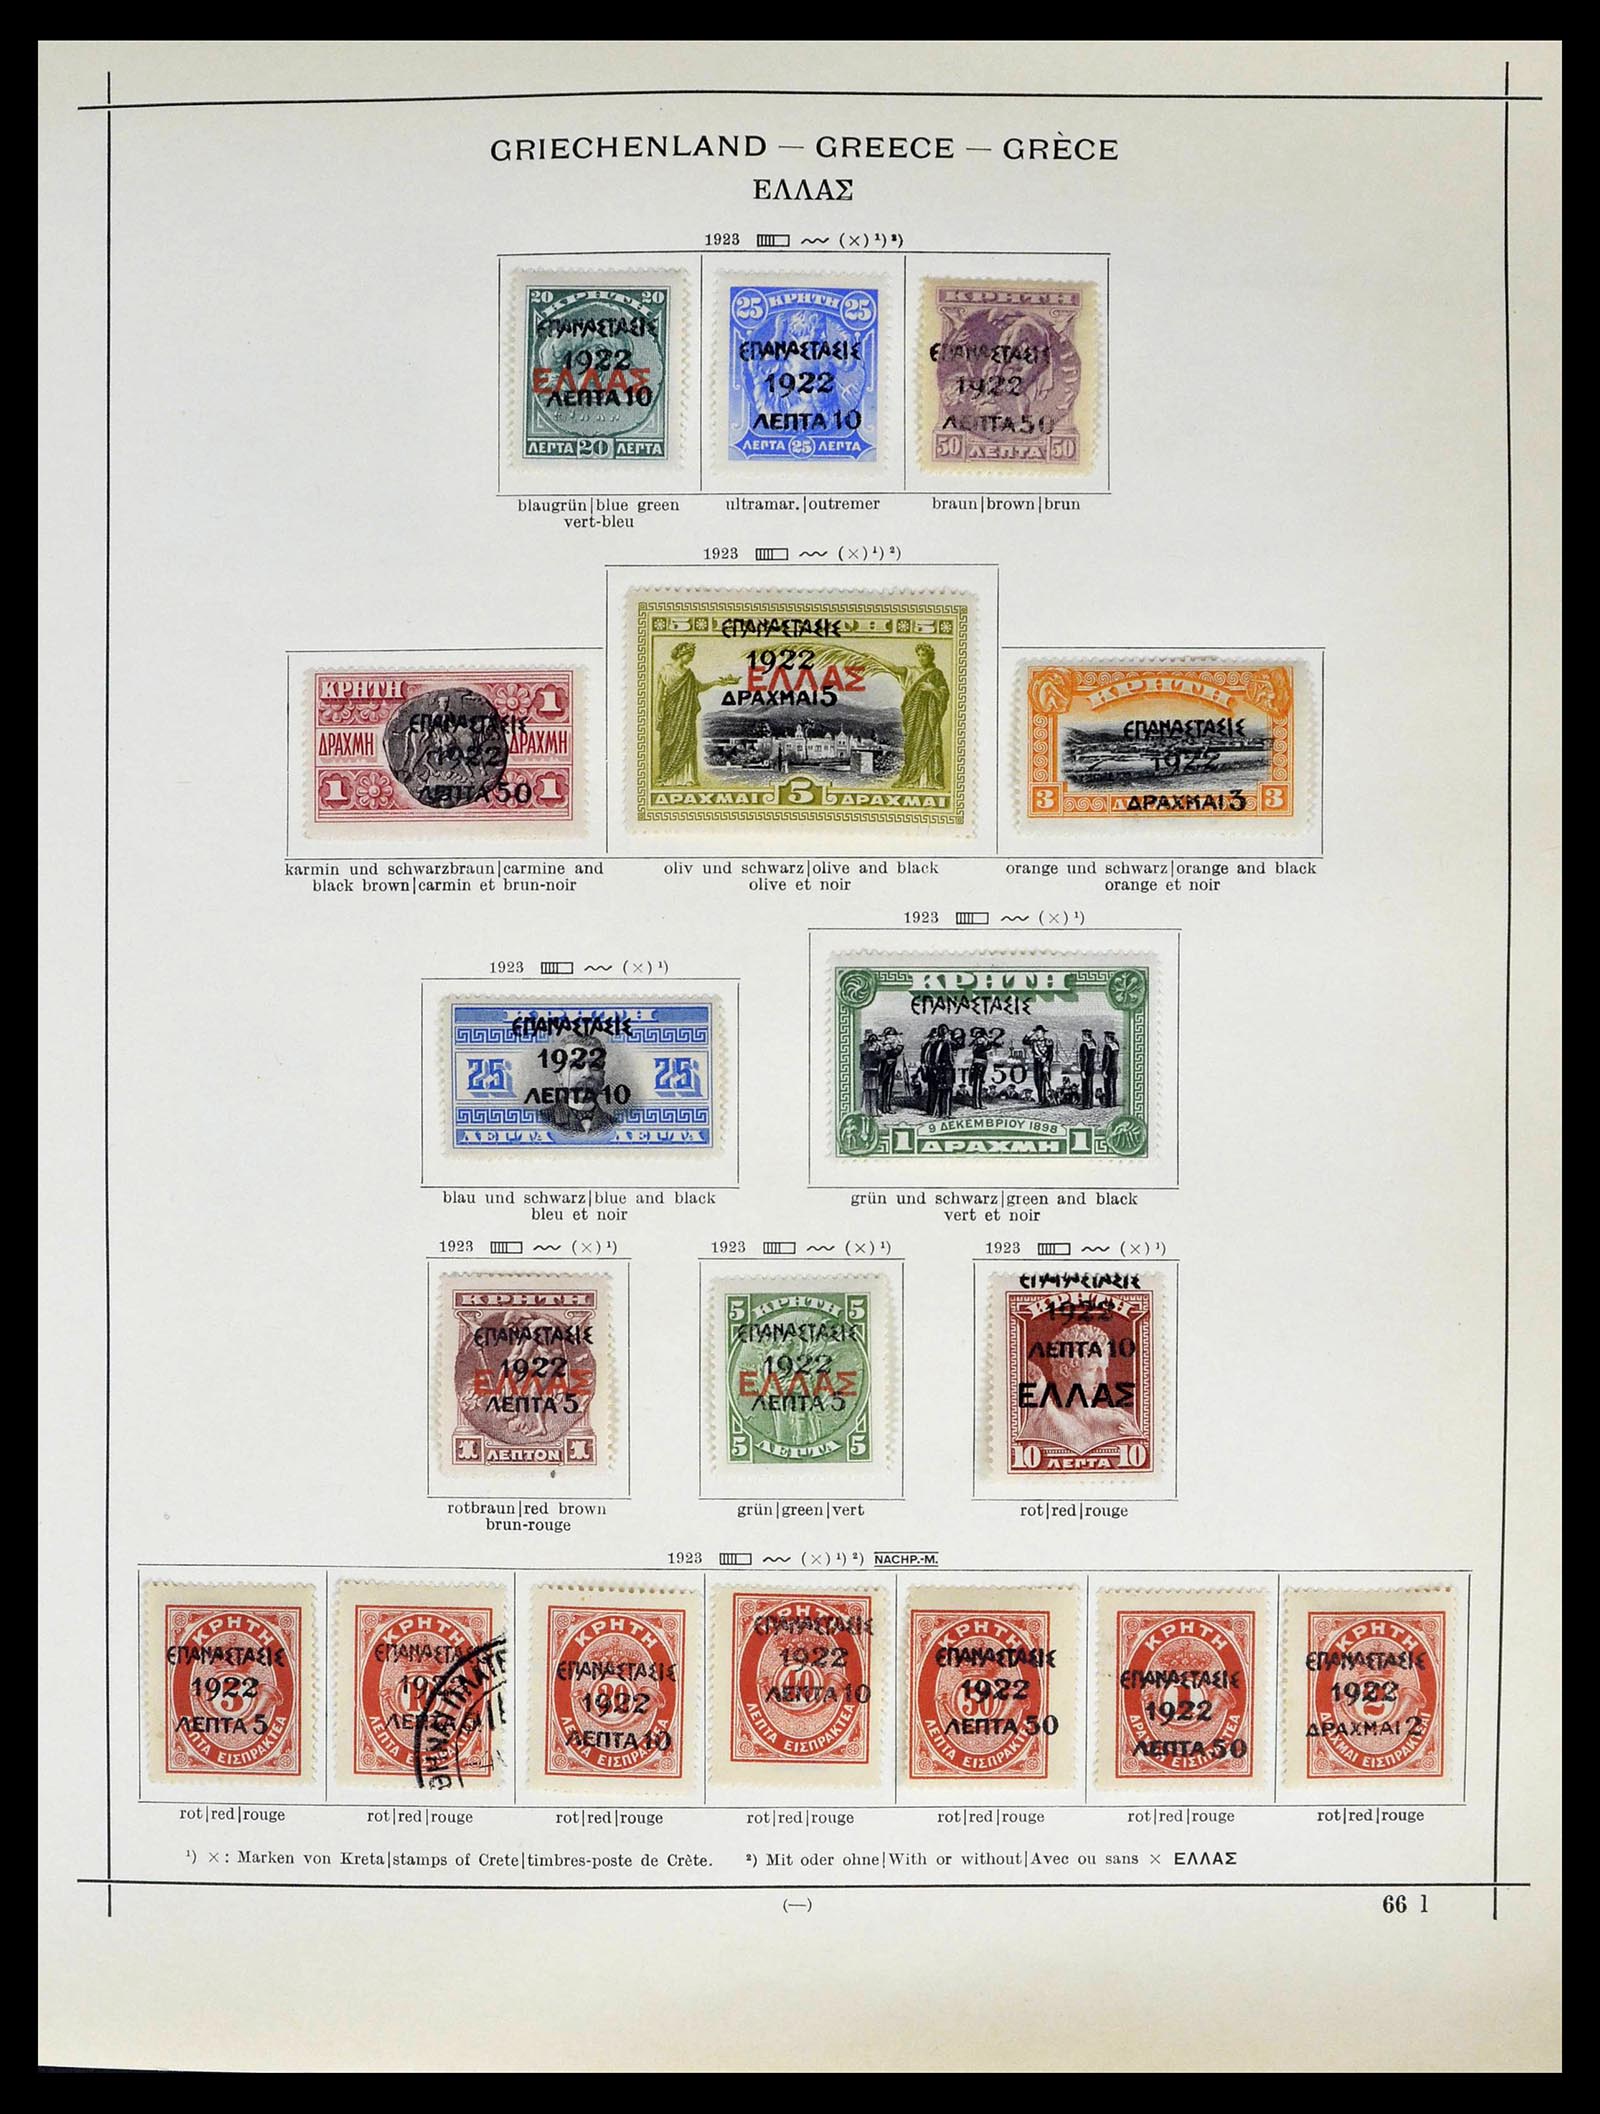 39156 0016 - Stamp collection 39156 Greece 1861-1996.